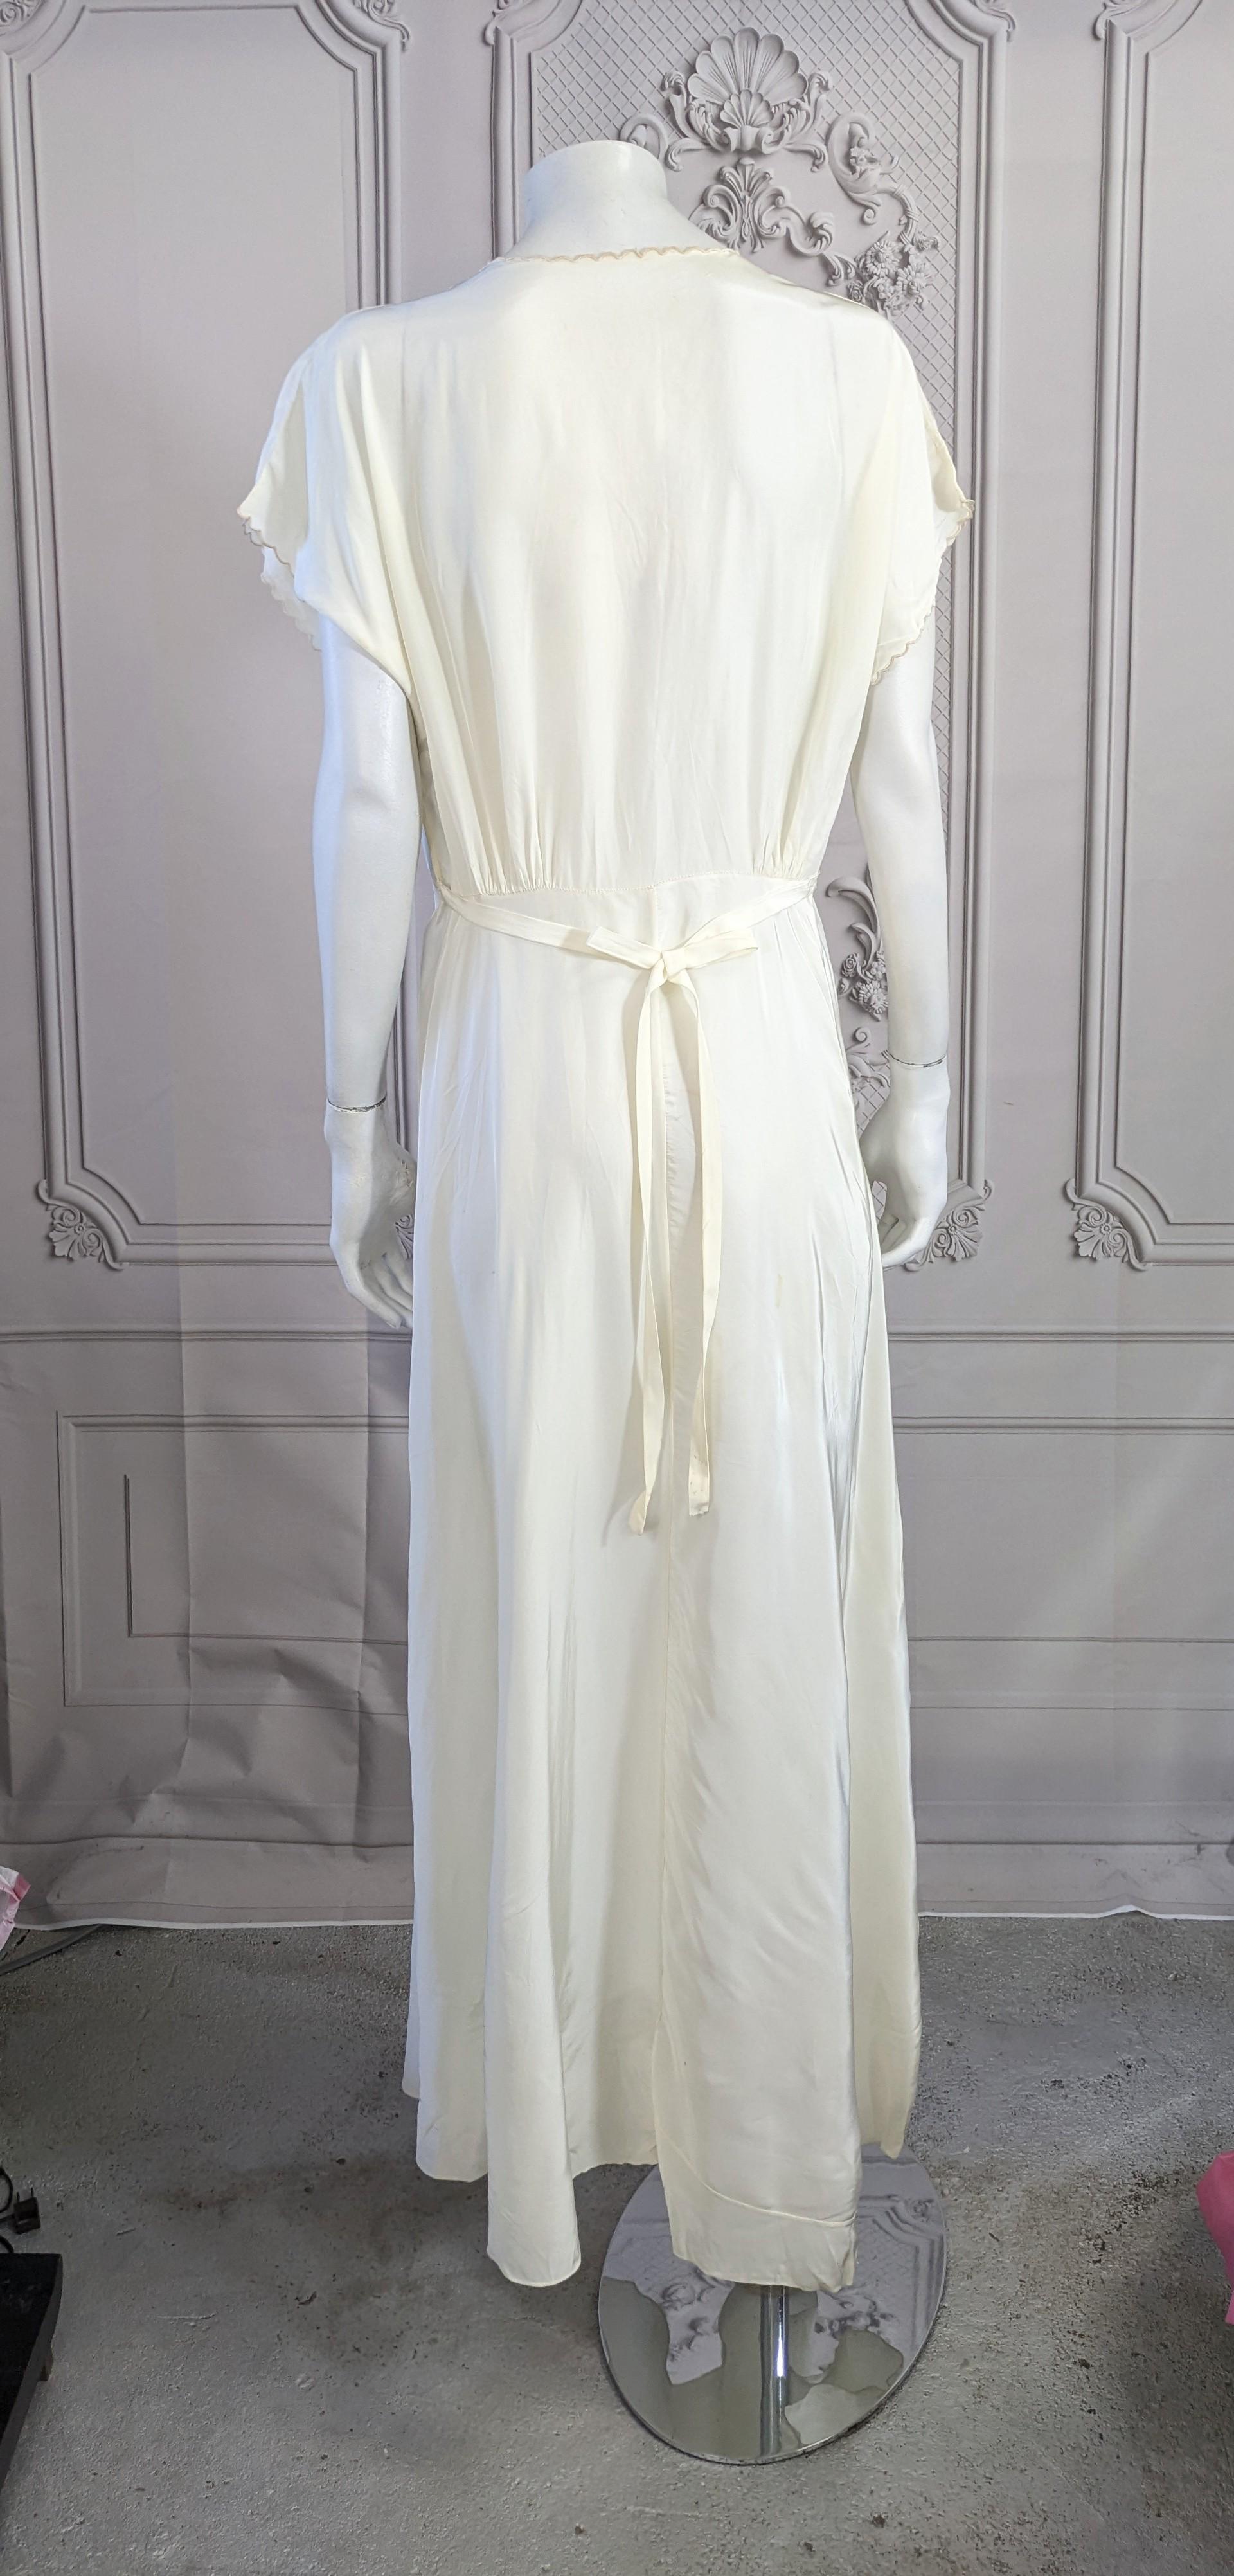 Charming Ivory Slip Dress, 18th Century Courtesan Embroideries For Sale 2